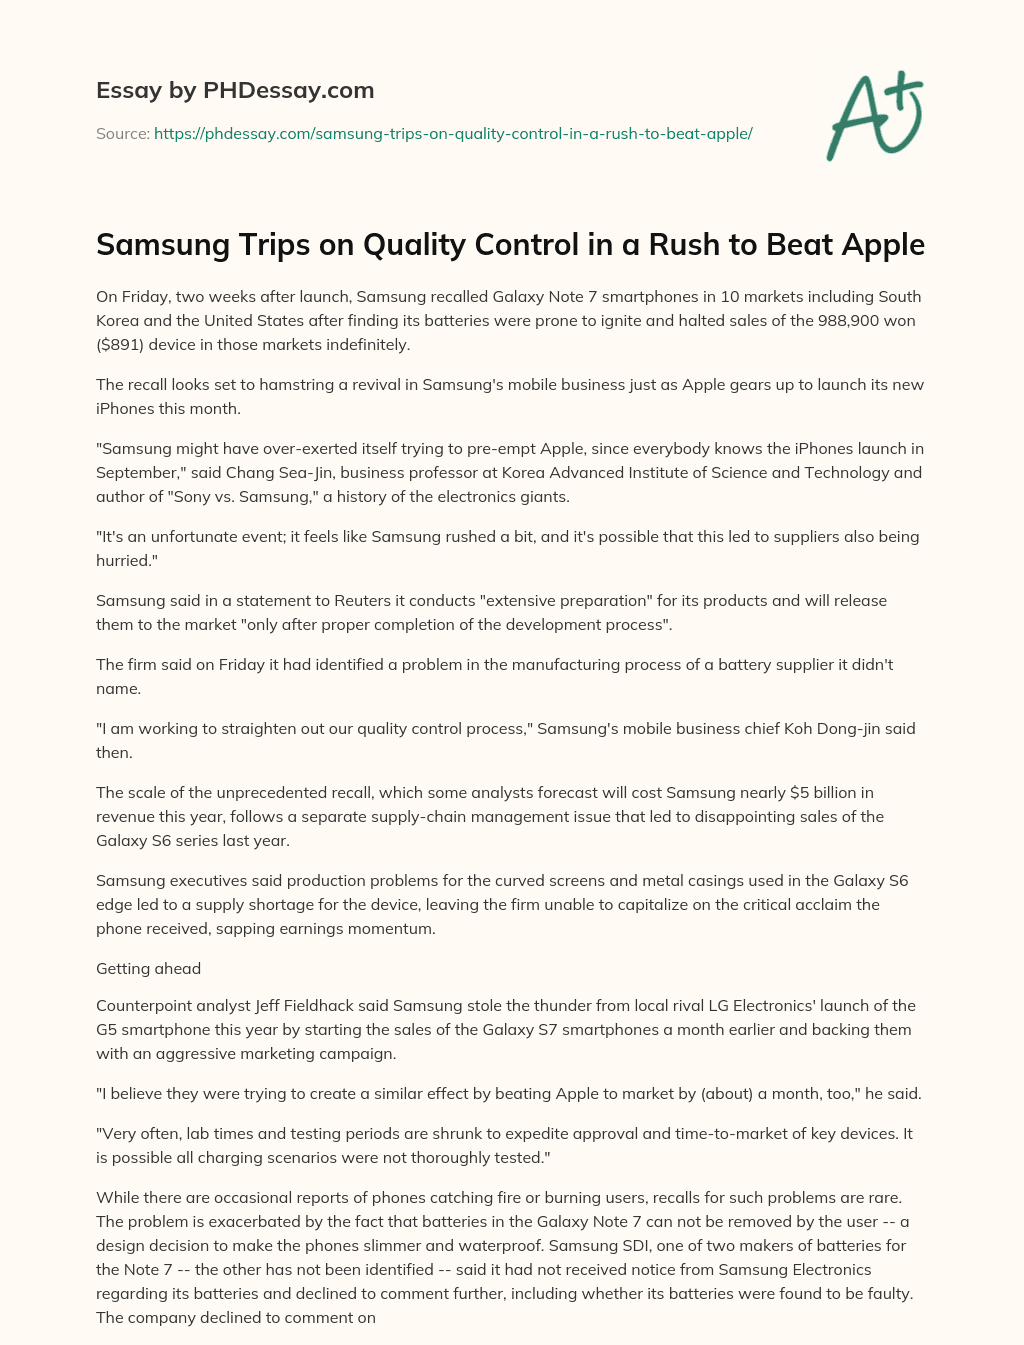 Samsung Trips on Quality Control in a Rush to Beat Apple essay